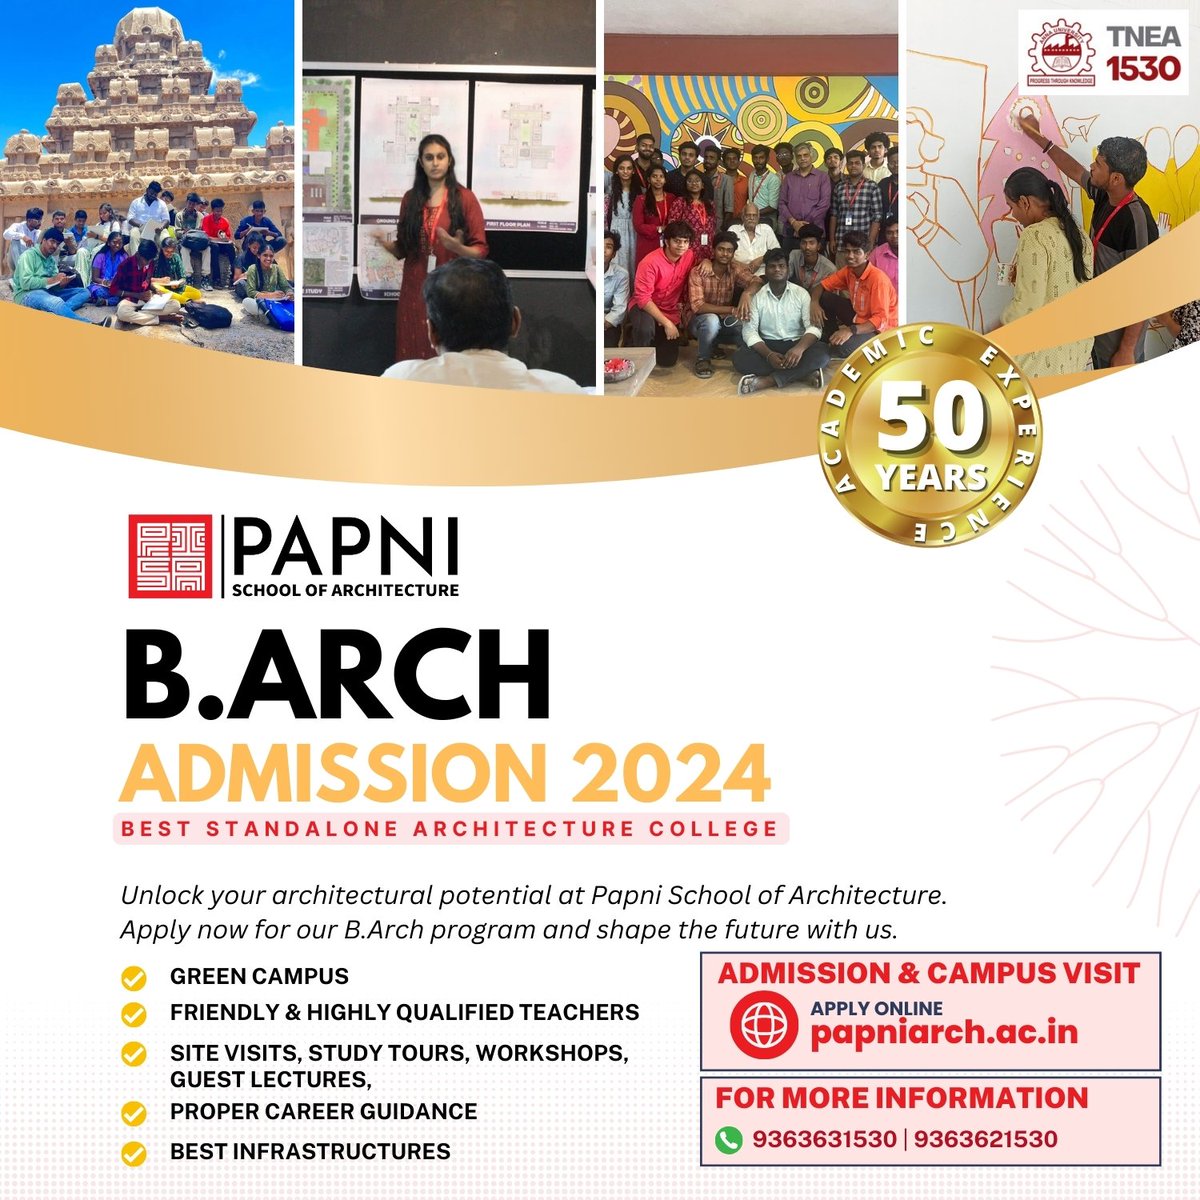 B.Arch. Admission Open Now at Tamil Nadu's Best Standalone Architecture College Papni School of Architecture!

For Admission ➡️ cutt.ly/9w0VMqZt

#BArchAdmission #barch #nata2024 #papnisoa #BArchAdmission2024 #ArchitectureAdmissions #2024BArch #BuildingDreams